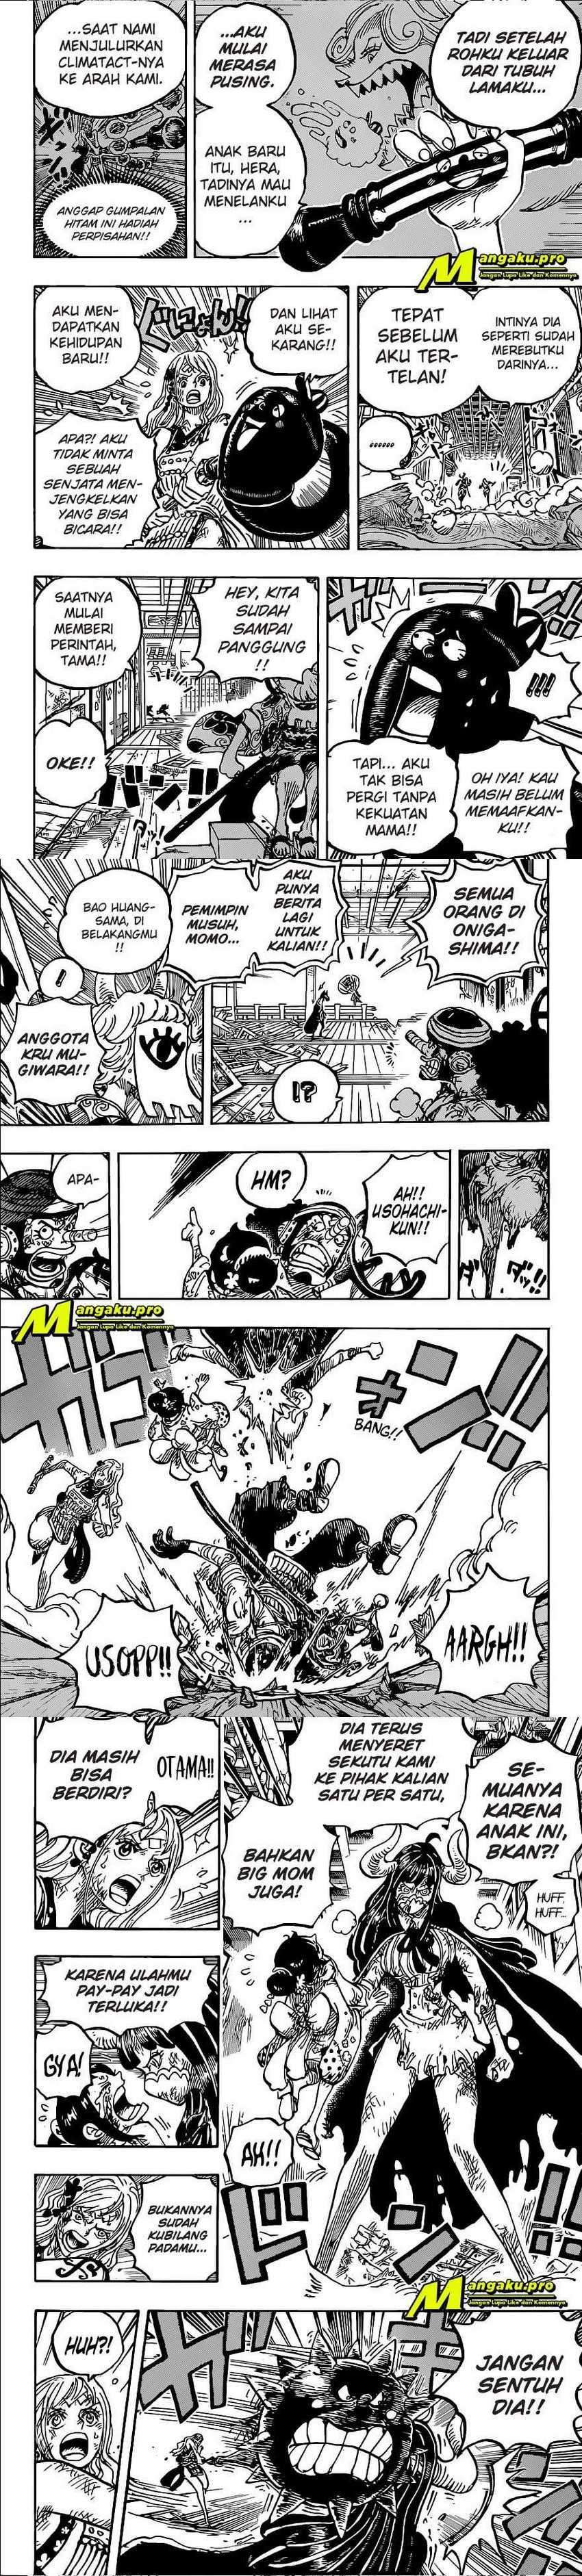 One Piece Chapter 1016